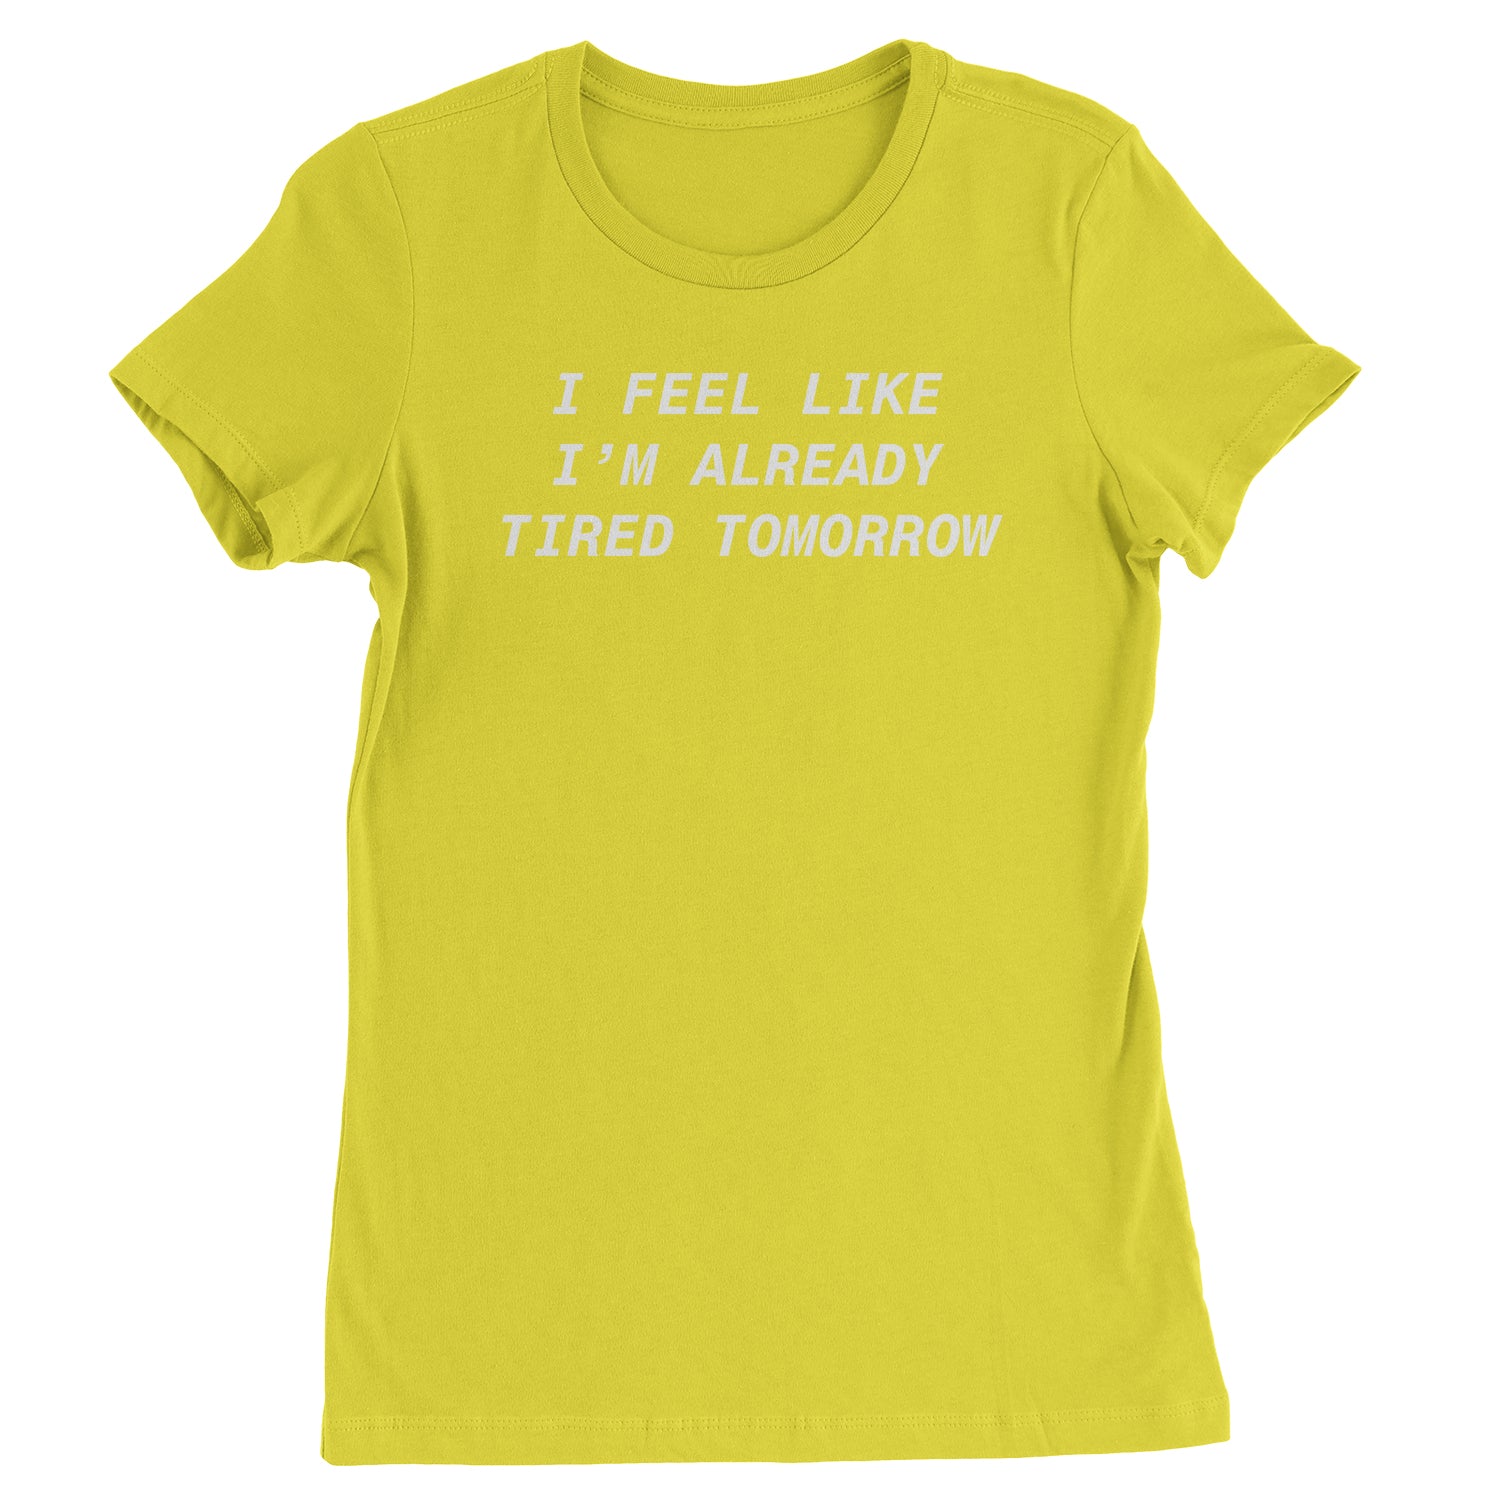 I Feel Like I'm Already Tired Tomorrow Womens T-shirt #expressiontees by Expression Tees